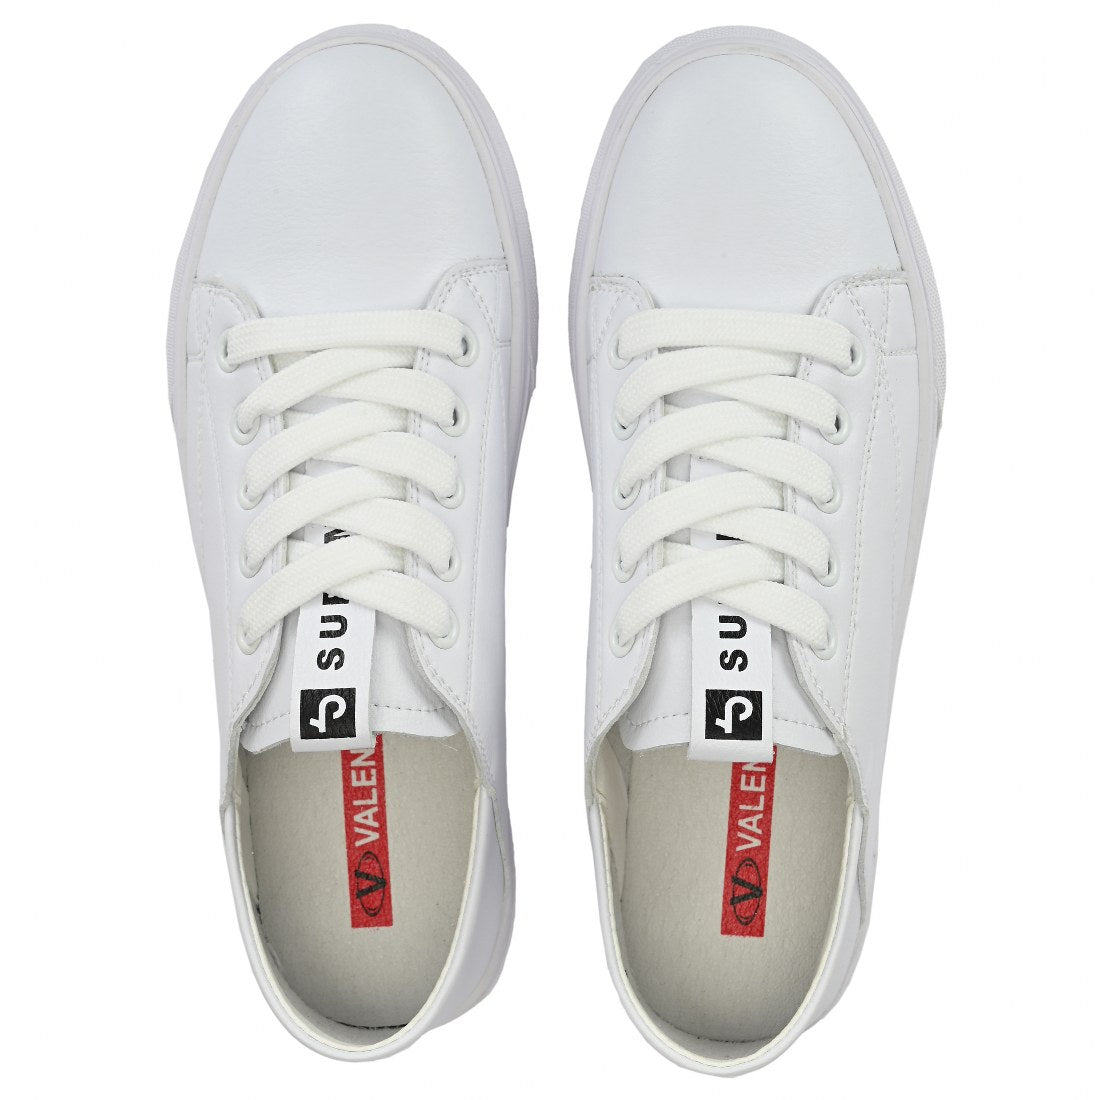 W-DIMP-1025 WOMEN LEATHERITE WHITE CASUAL LACE UP SNEAKERS